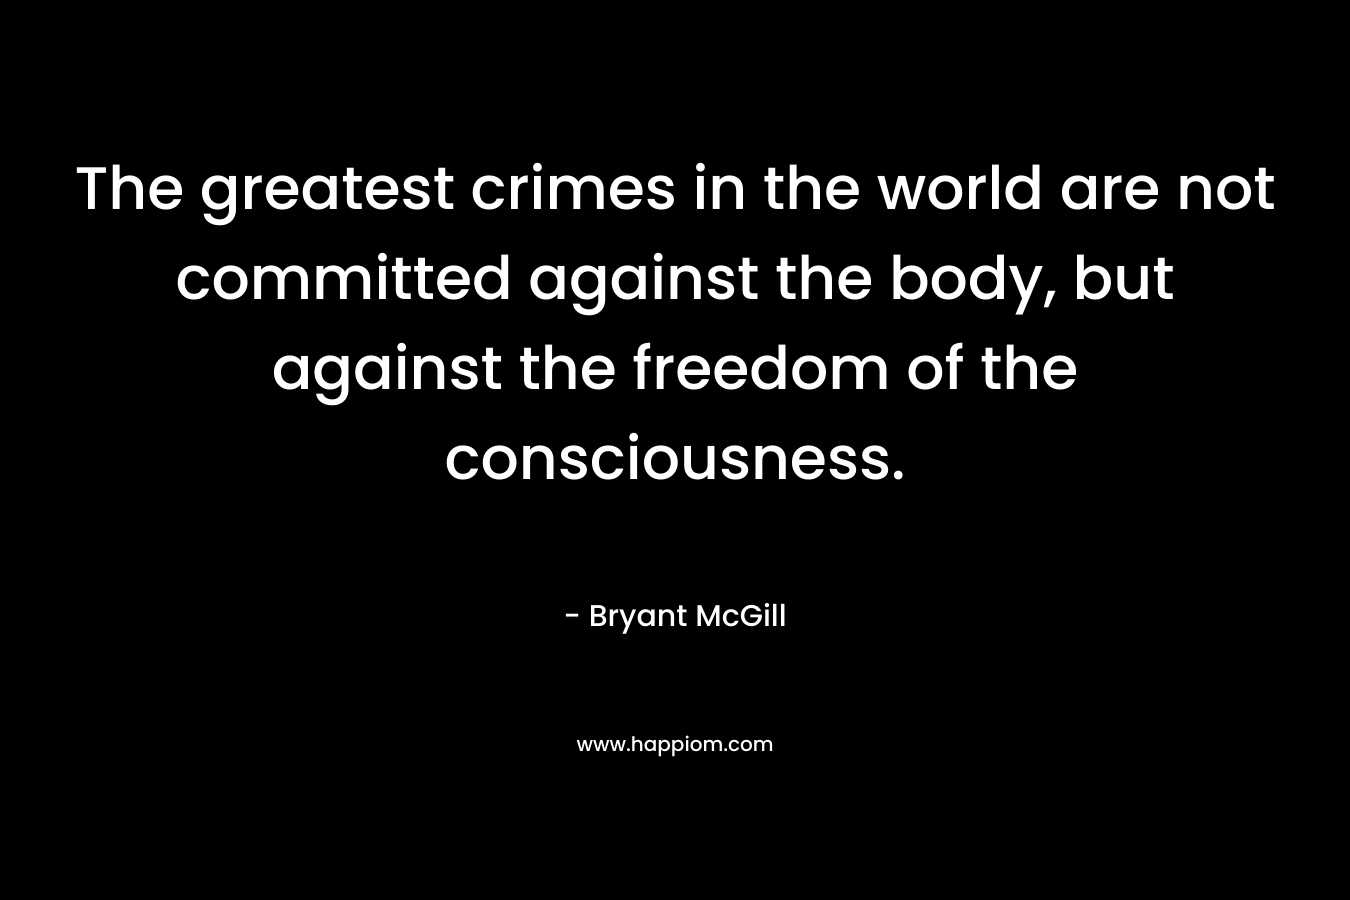 The greatest crimes in the world are not committed against the body, but against the freedom of the consciousness.